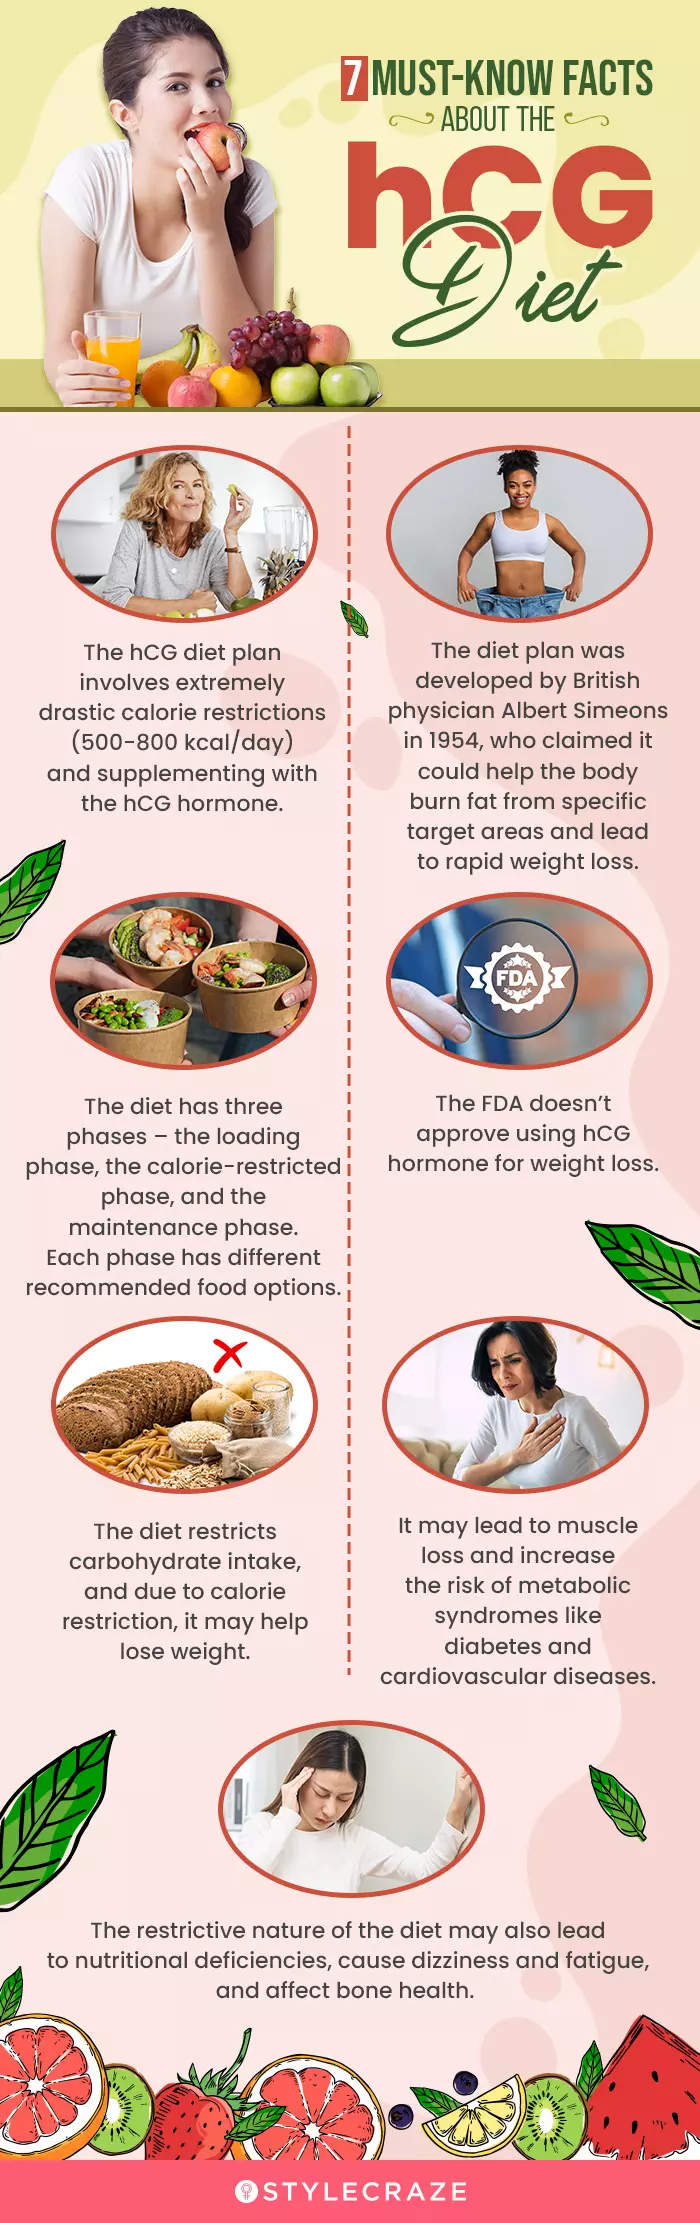 7 must know facts about the hcg diet (infographic)